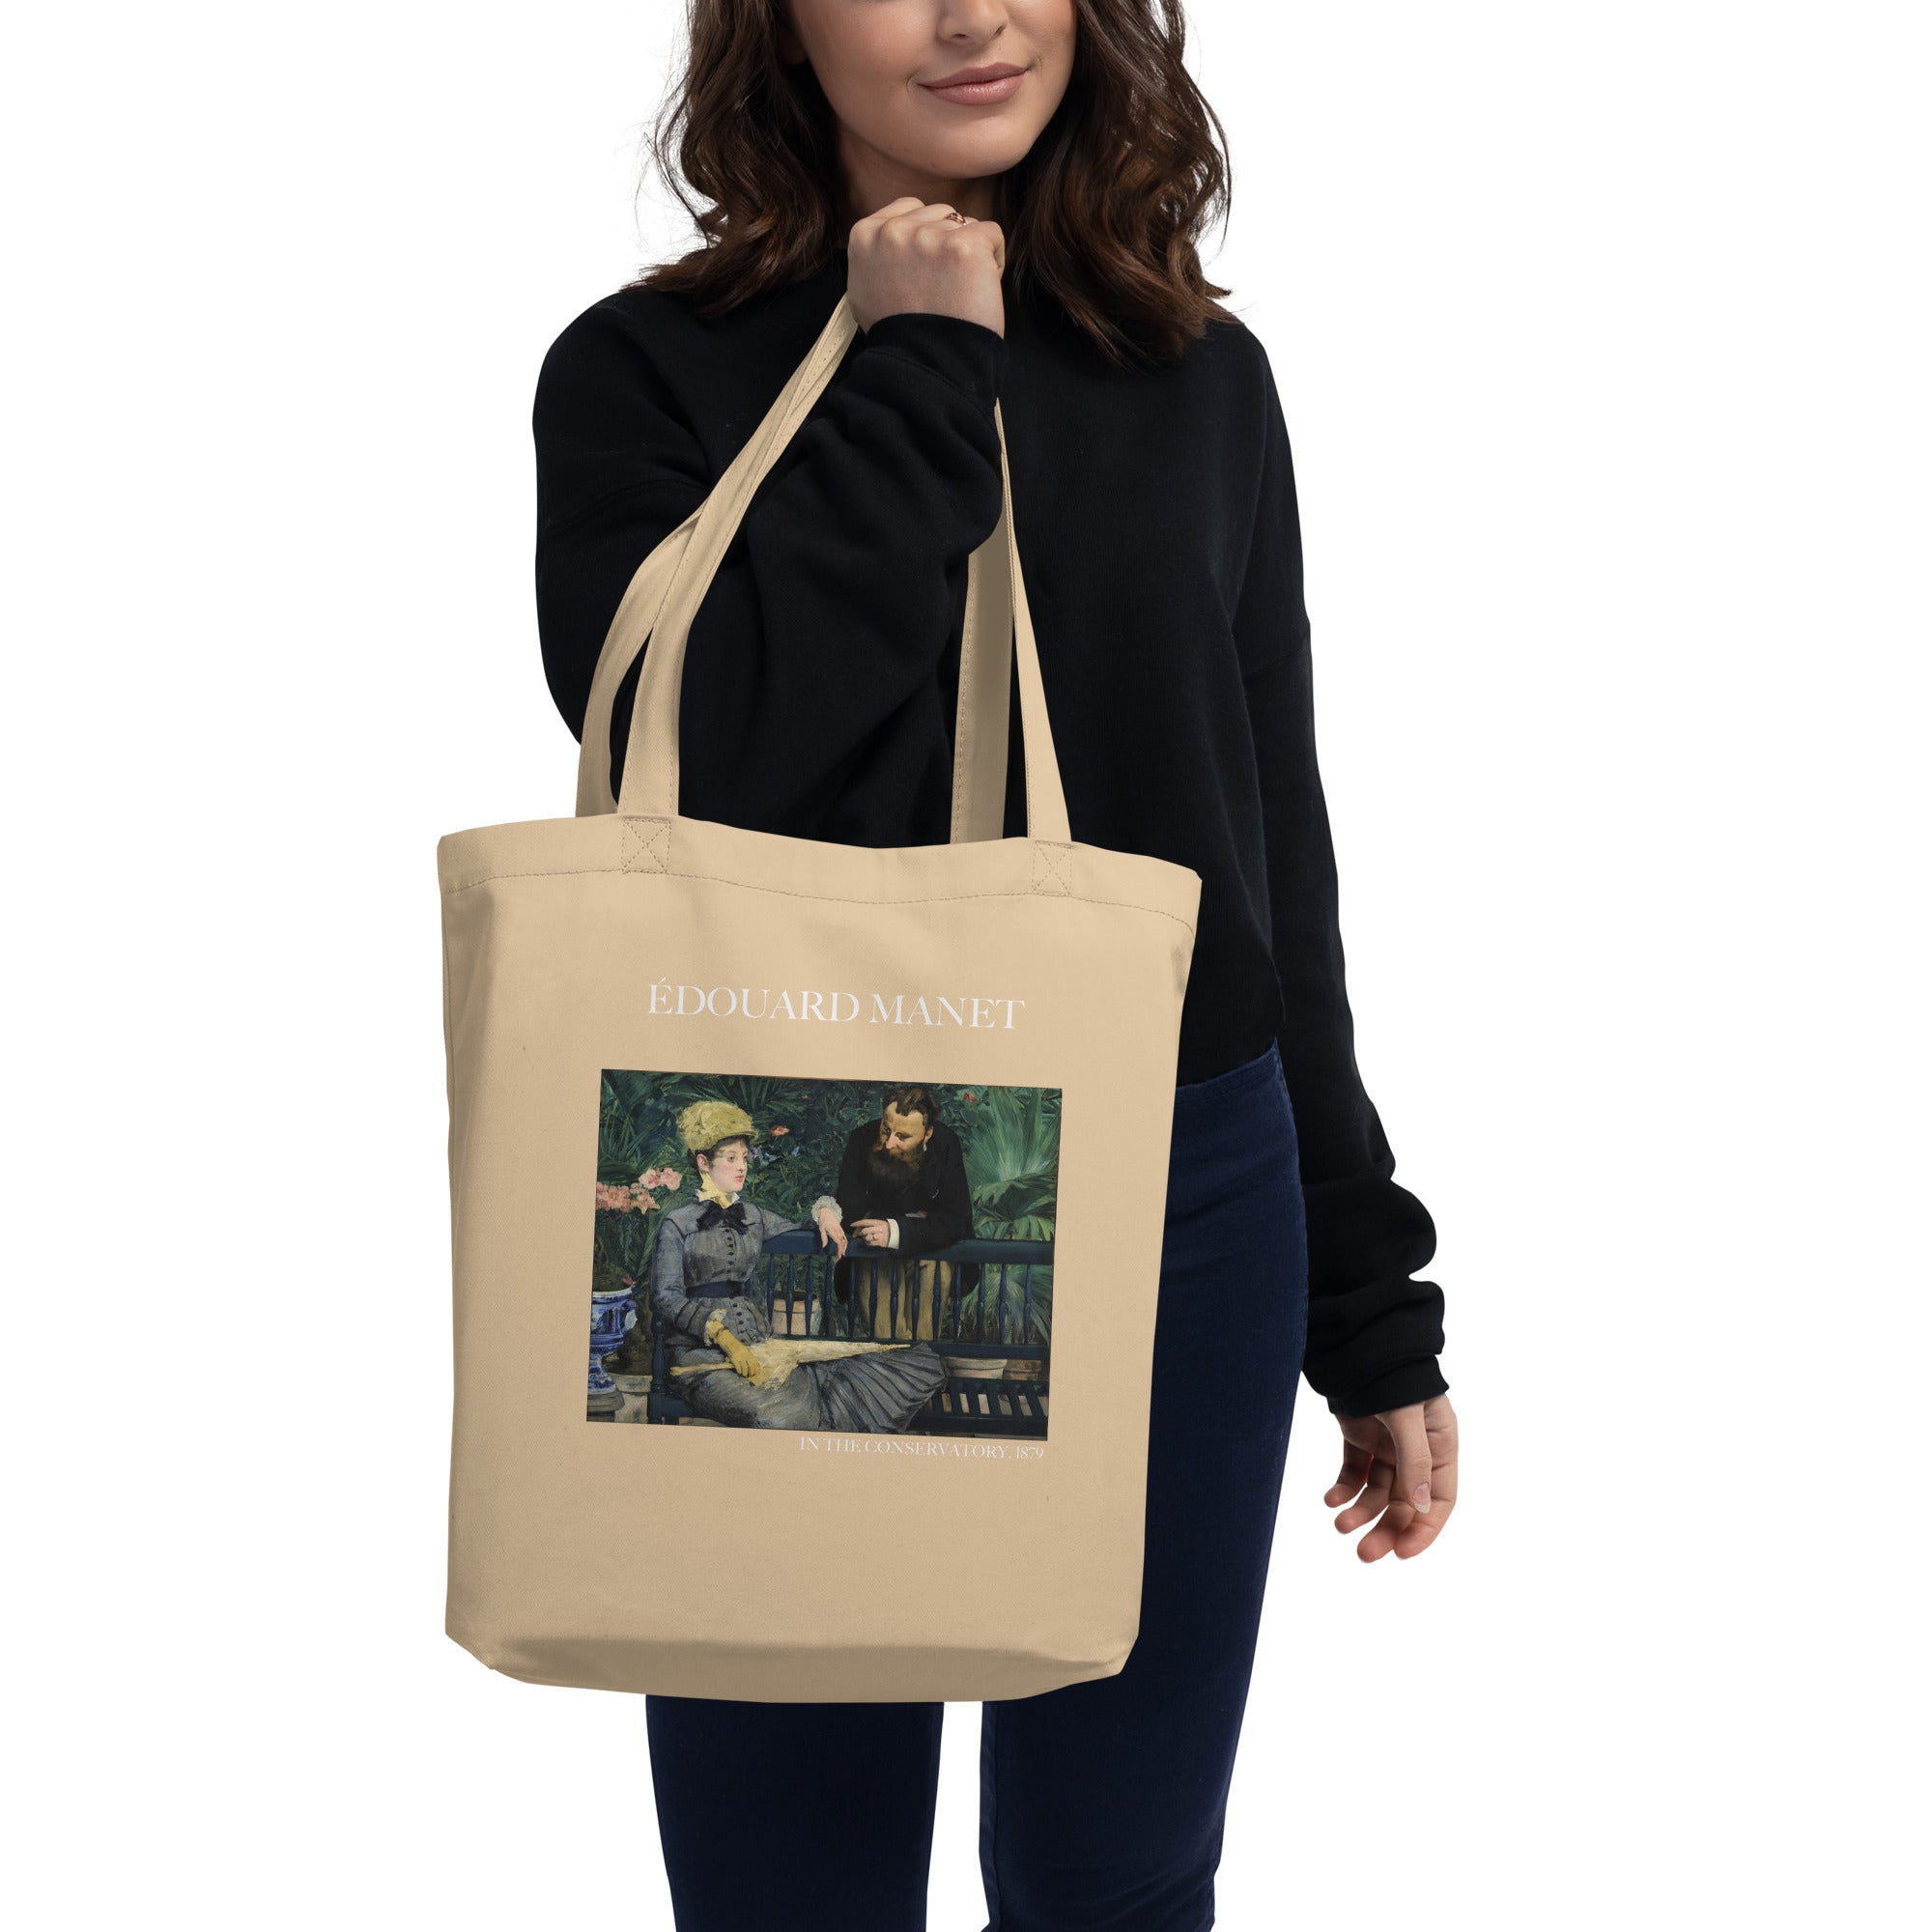 Édouard Manet 'In the Conservatory' Famous Painting Totebag | Eco Friendly Art Tote Bag